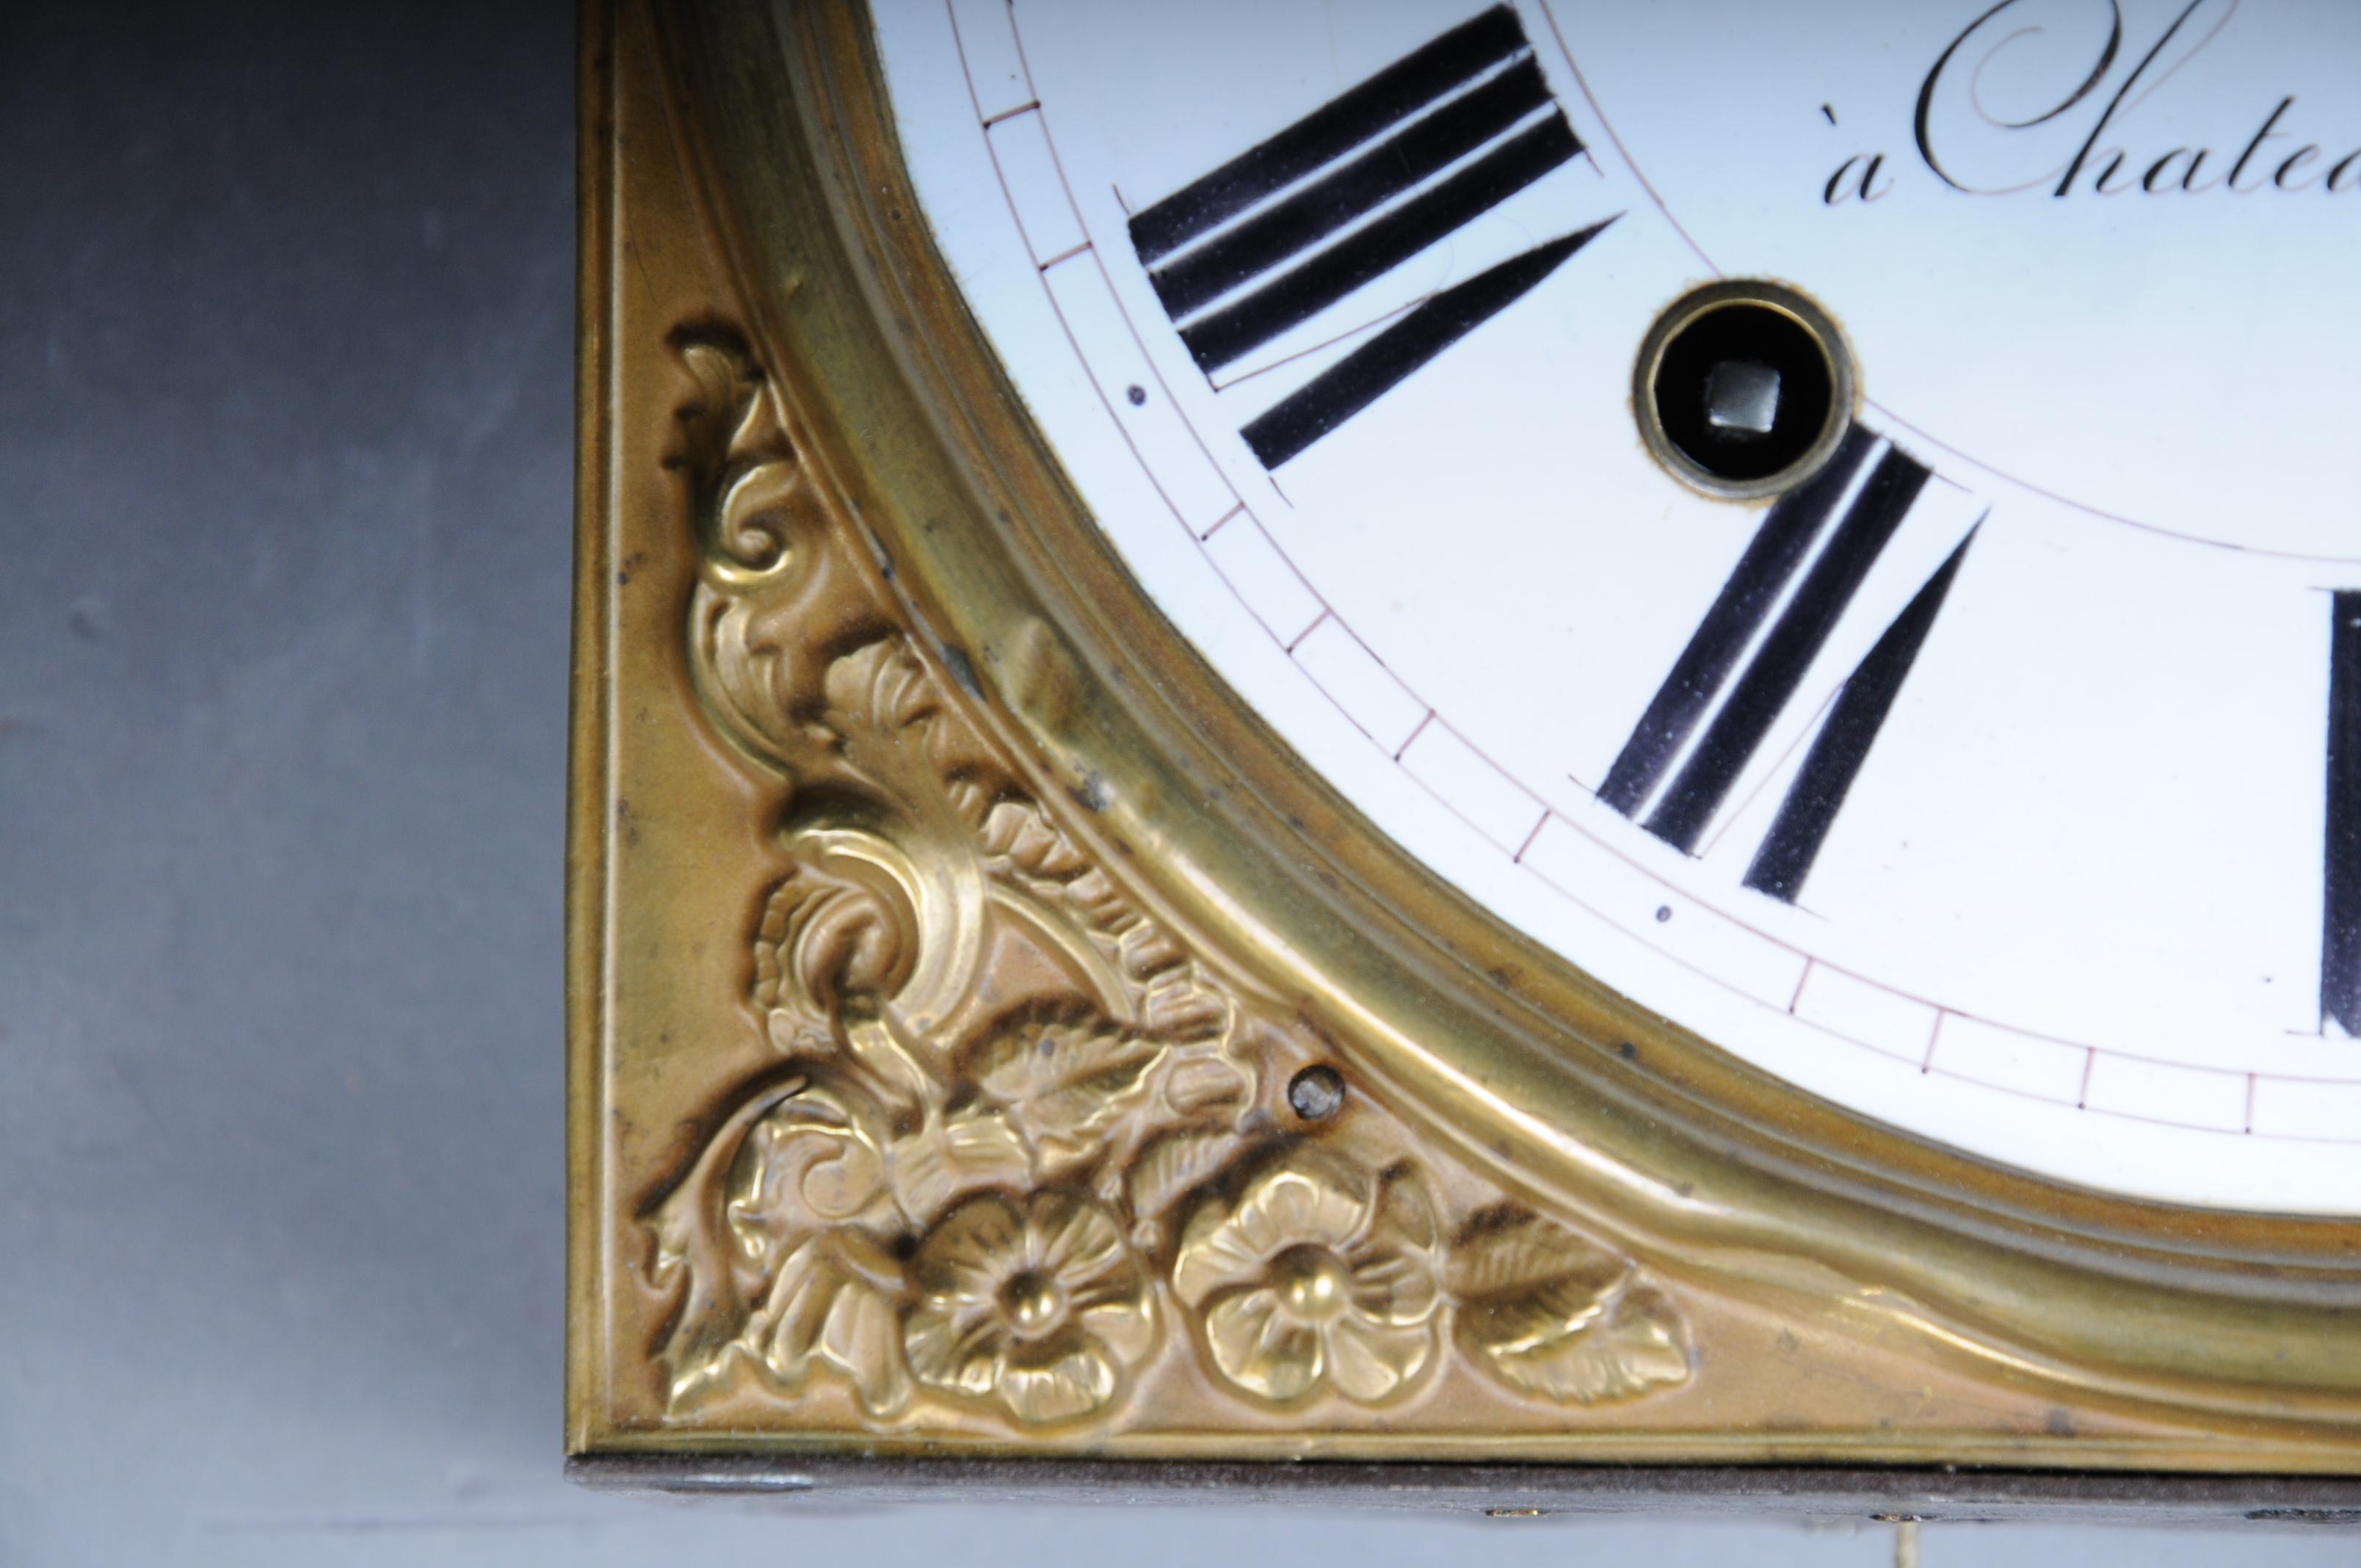 19th Century High Quality Originals Comtoise / Wall Clock Brass In Good Condition For Sale In Berlin, DE